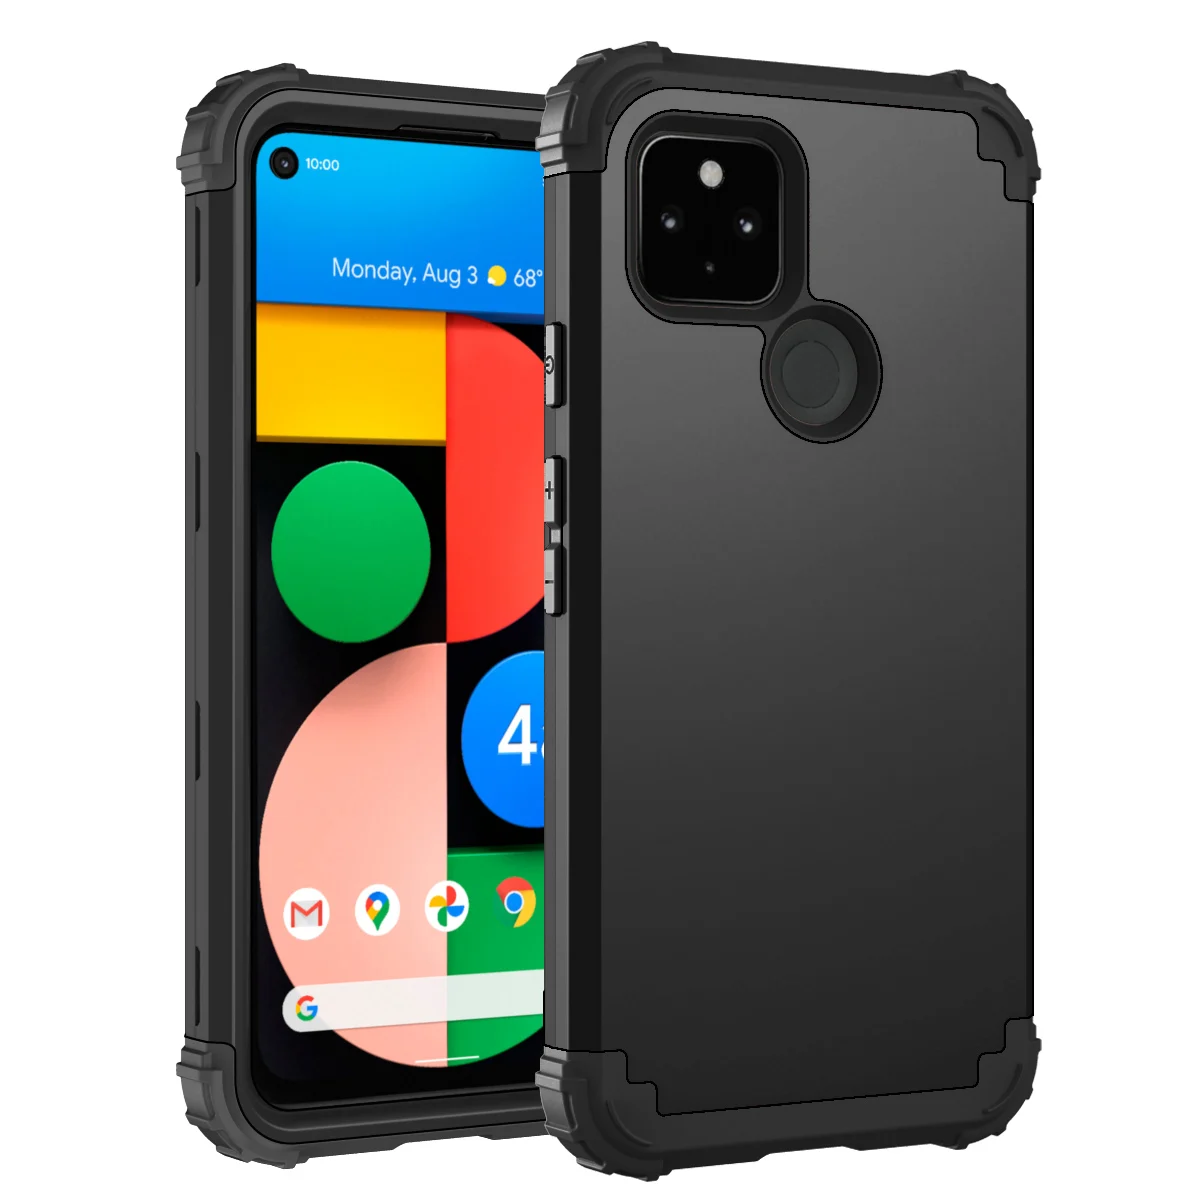 

Heavy Duty Rugged Armor Shockproof Case For Google Pixel 4A 5G 5A 6A 7A 6 7 Pro 5 4 XL Soft TPU Silicone Hard Plastic Back Cover